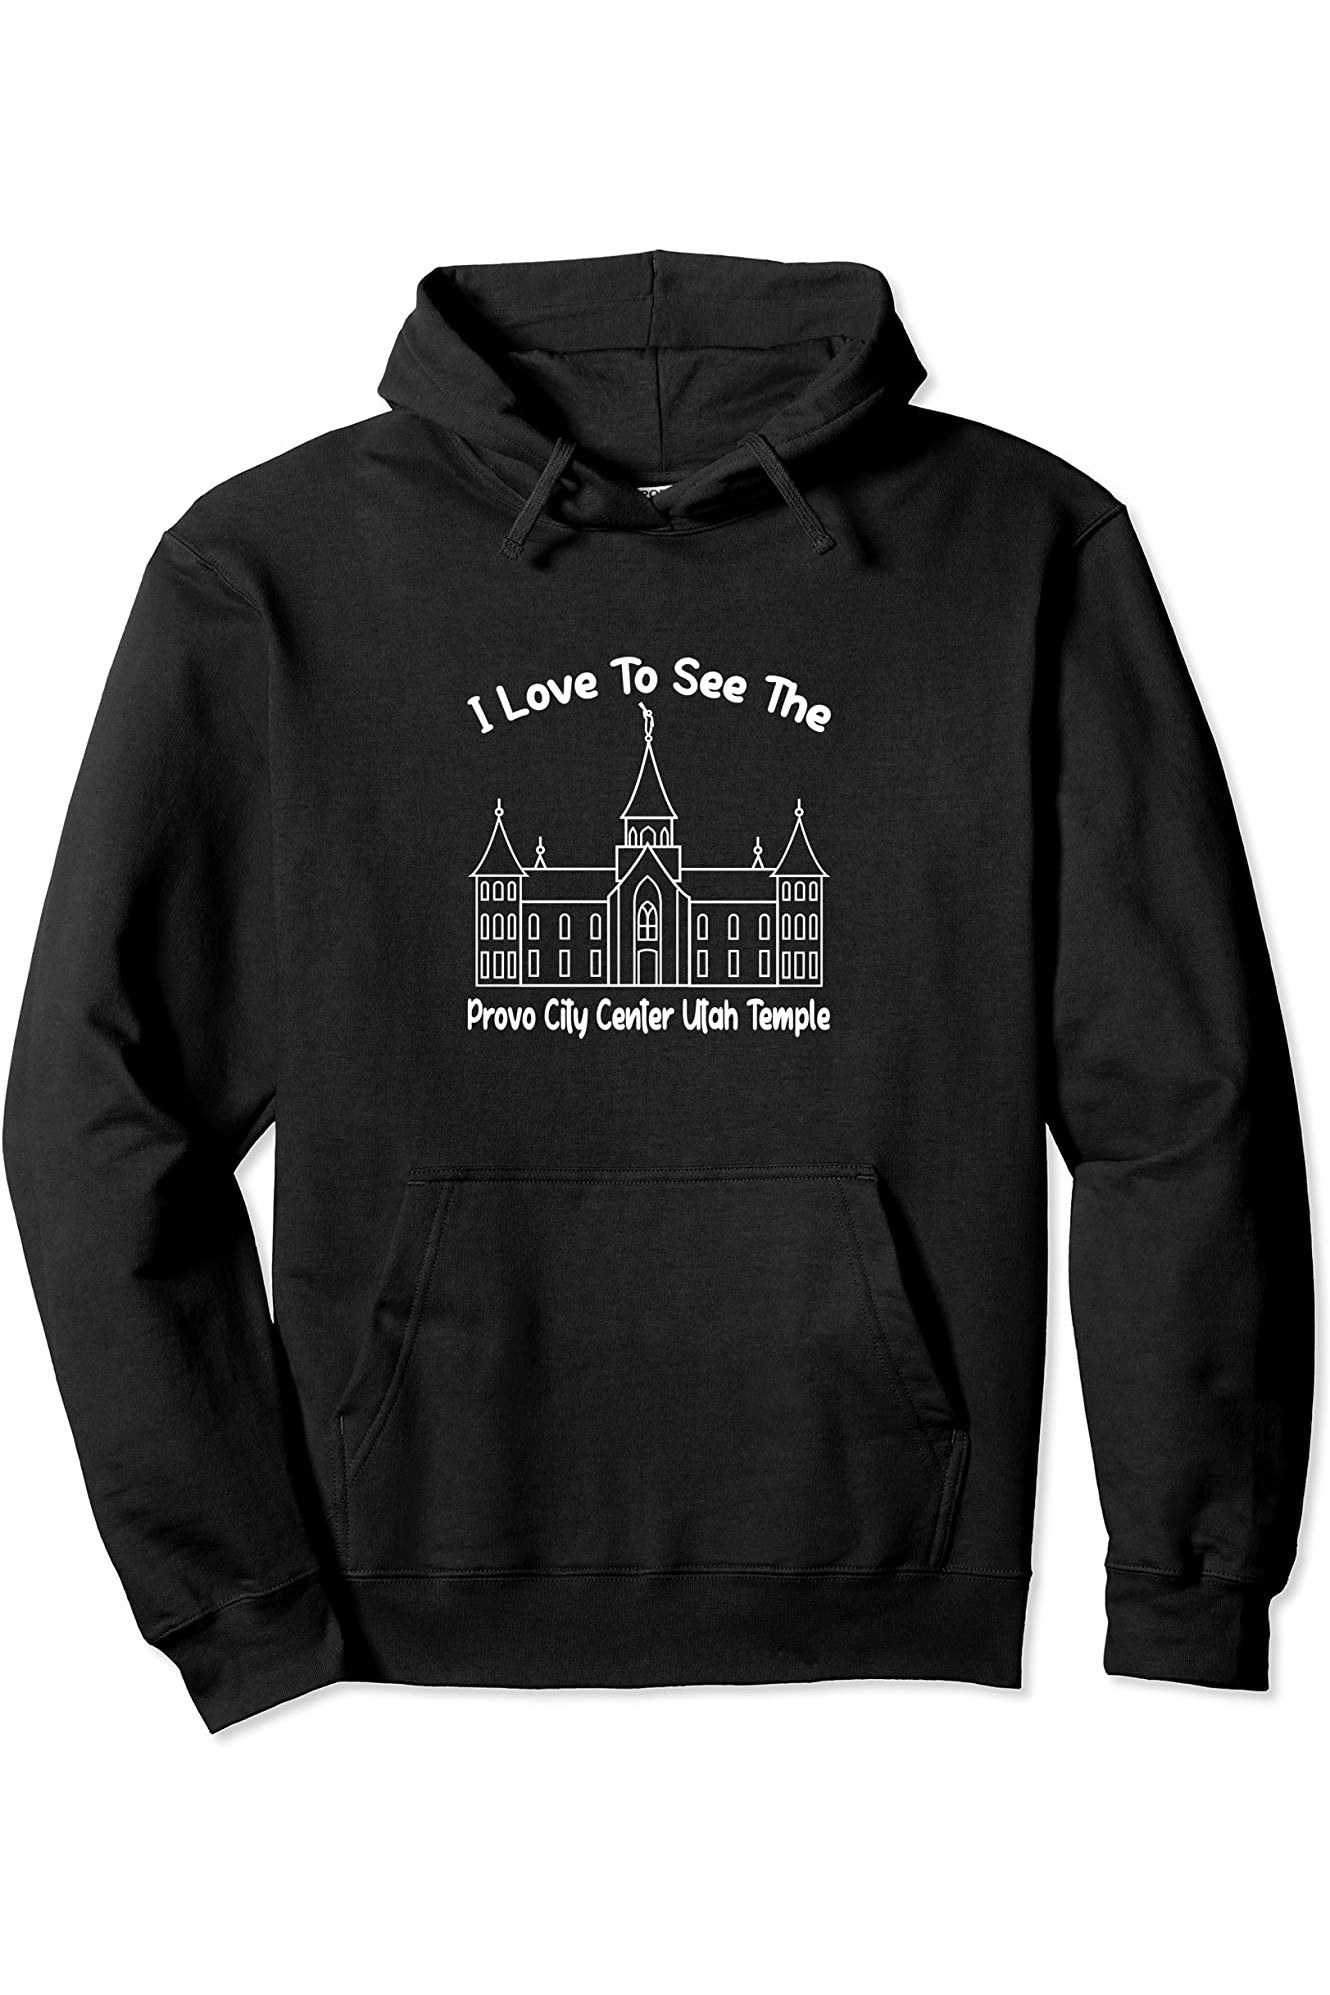 Provo City Center Utah Temple Pullover Hoodie - Primary Style (English) US